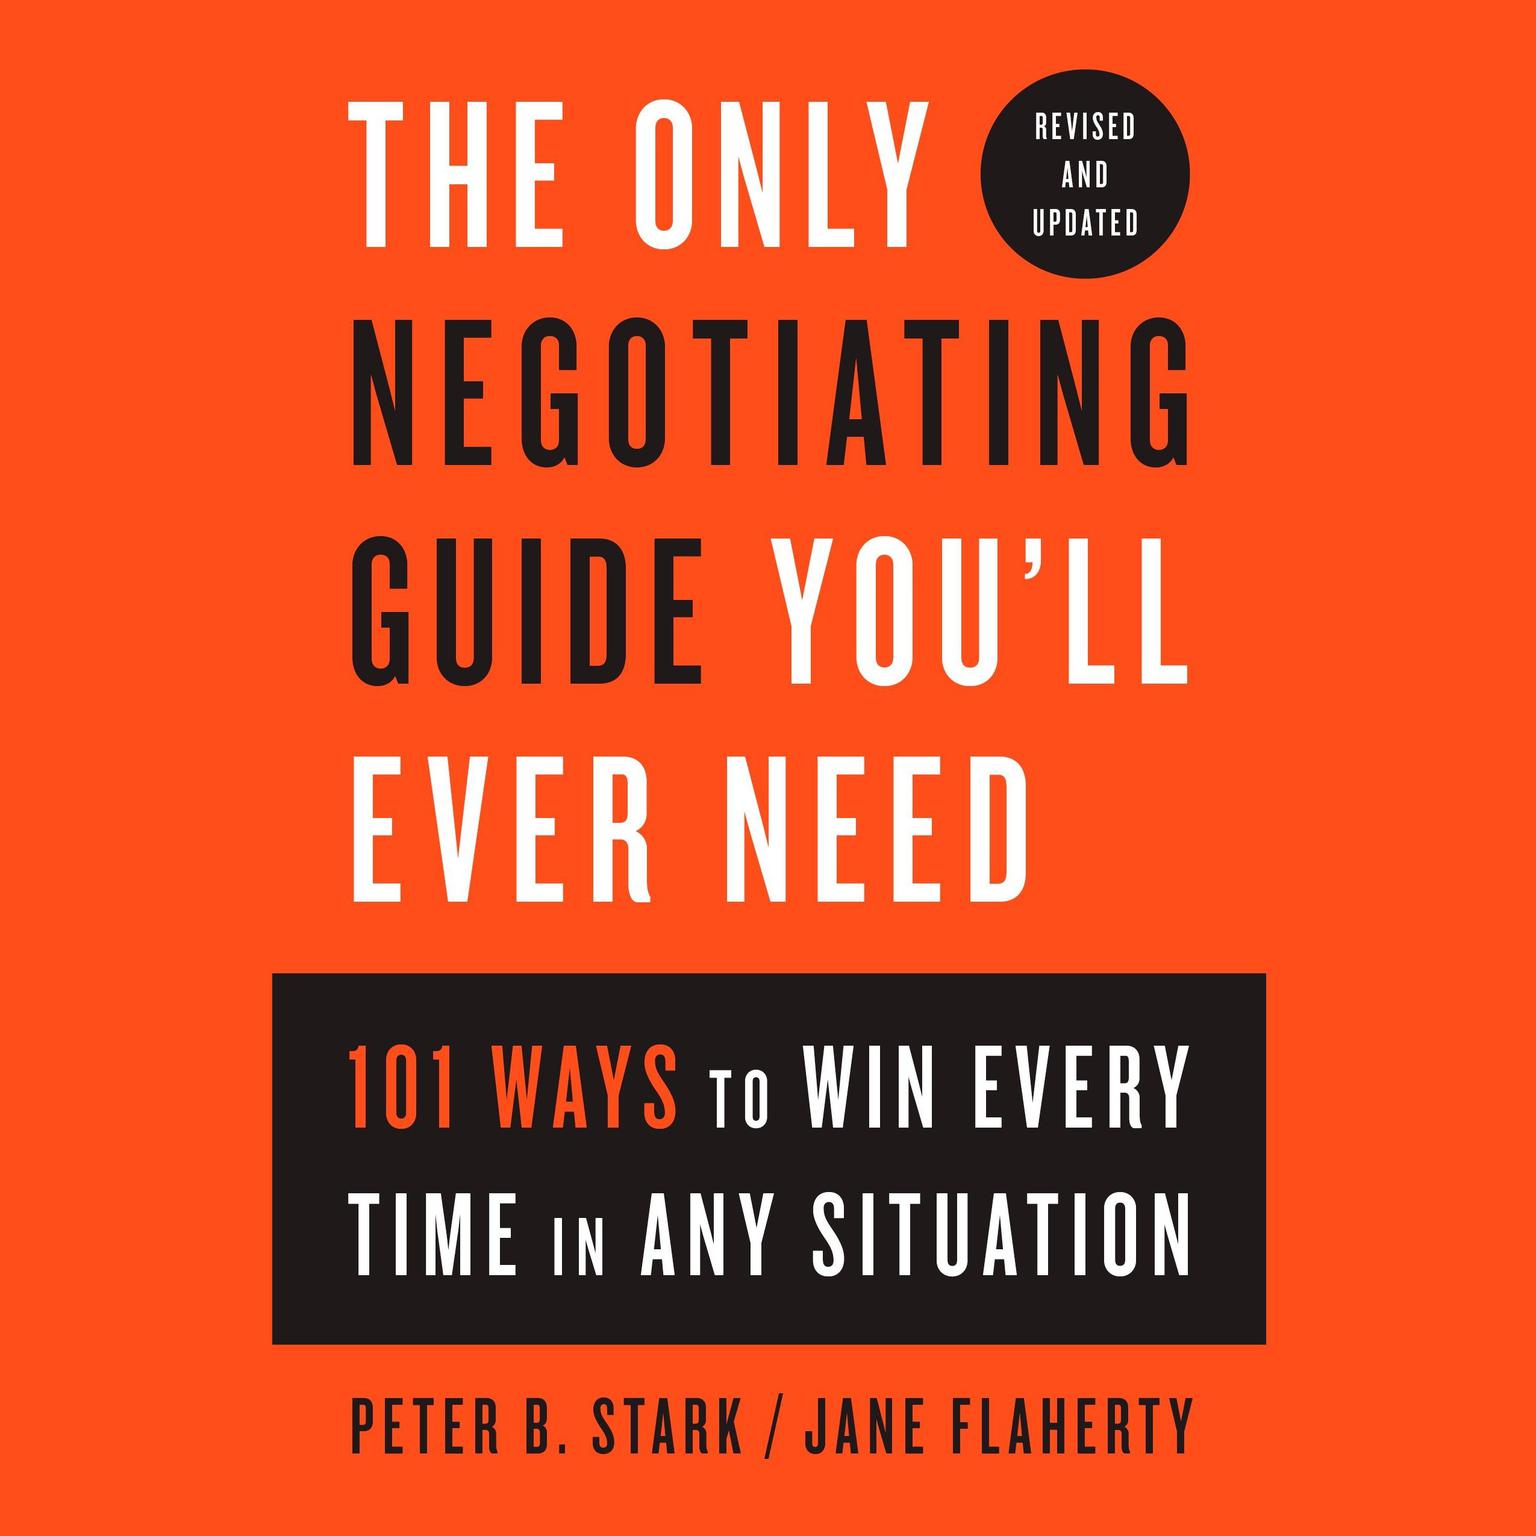 The Only Negotiating Guide Youll Ever Need, Revised and Updated: 101 Ways to Win Every Time in Any Situation Audiobook, by Peter B. Stark